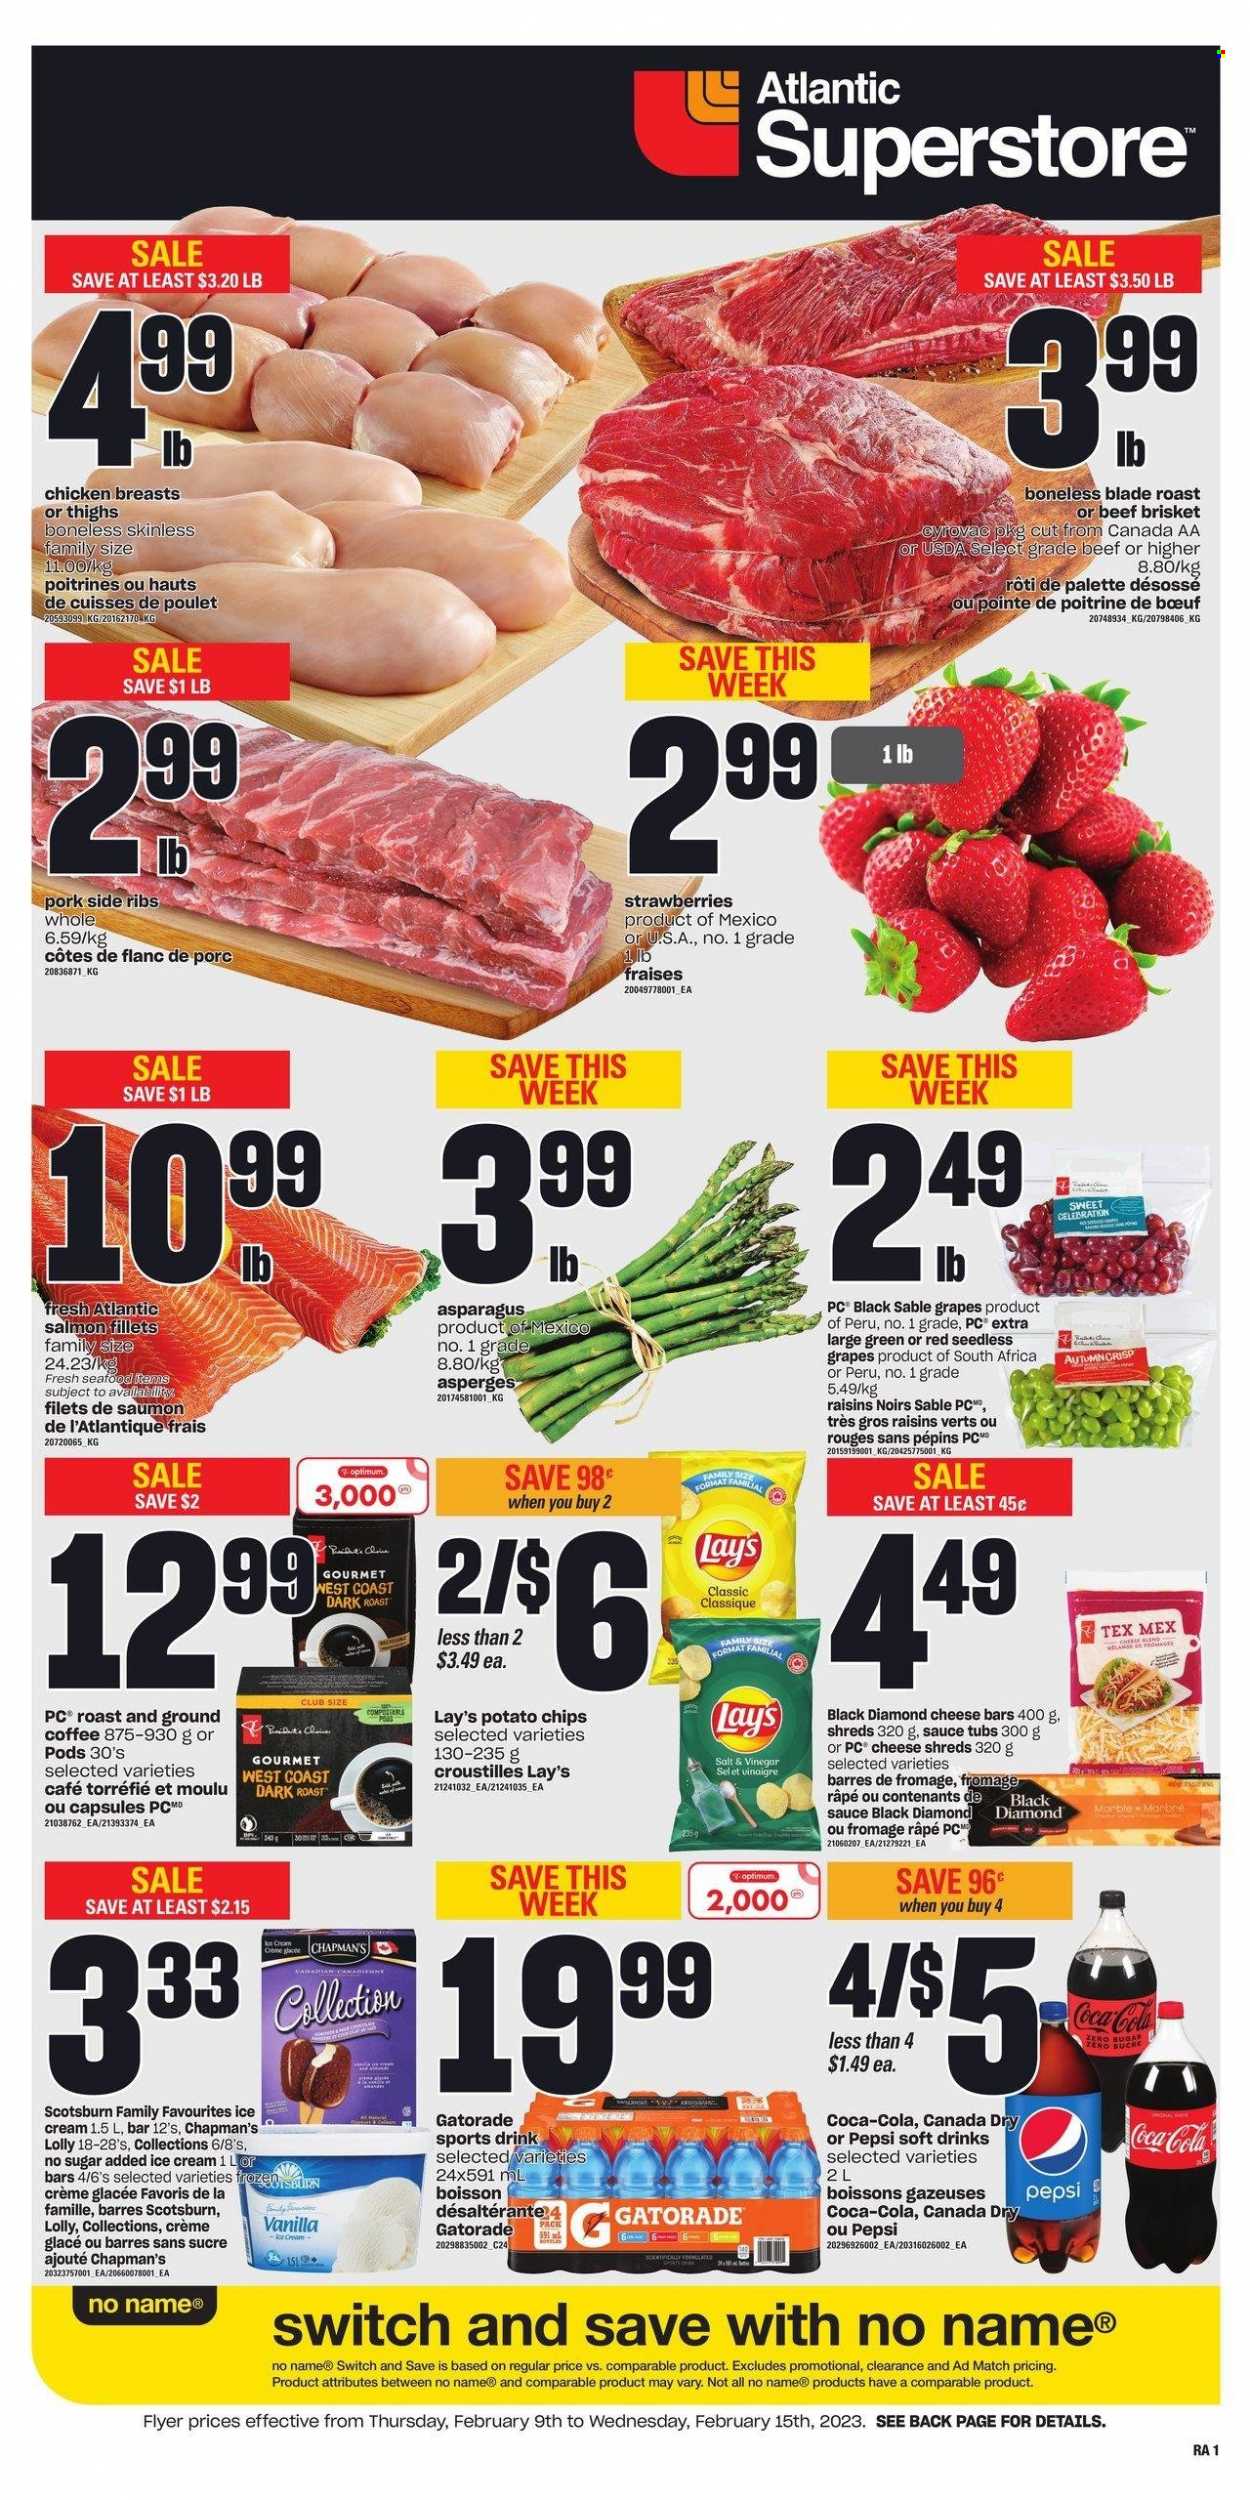 thumbnail - Atlantic Superstore Flyer - February 09, 2023 - February 15, 2023 - Sales products - asparagus, grapes, seedless grapes, strawberries, salmon, salmon fillet, seafood, No Name, sauce, ice cream, Celebration, lollipop, potato chips, Lay’s, dried fruit, Canada Dry, Coca-Cola, Pepsi, soft drink, Gatorade, coffee, ground coffee, L'Or, chicken breasts, beef meat, beef brisket, ribs, Palette, Optimum, raisins. Page 1.